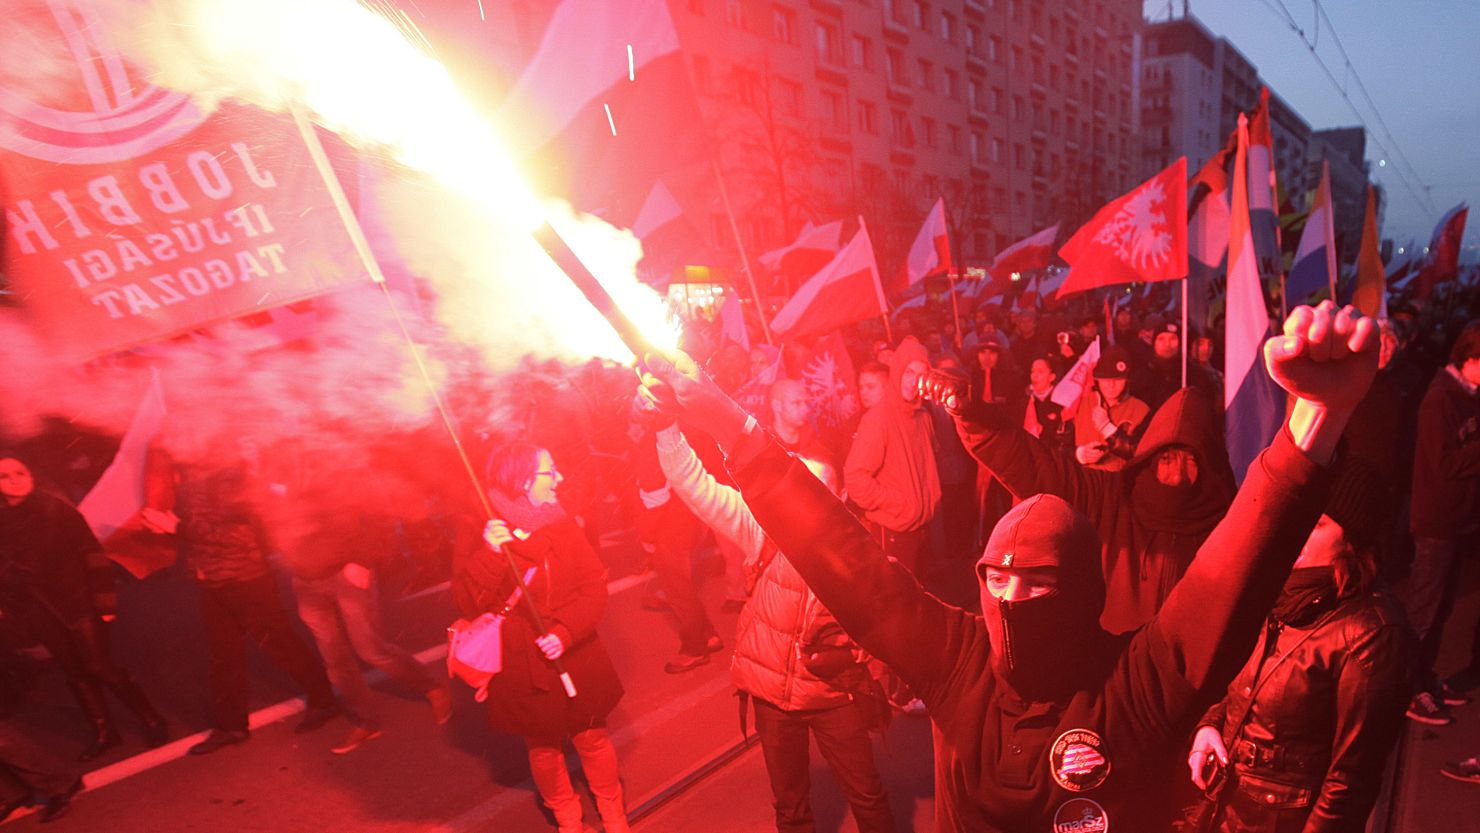 People hold burning flares as they march through the the centre of Warsaw, Poland on Monday,  November 11.